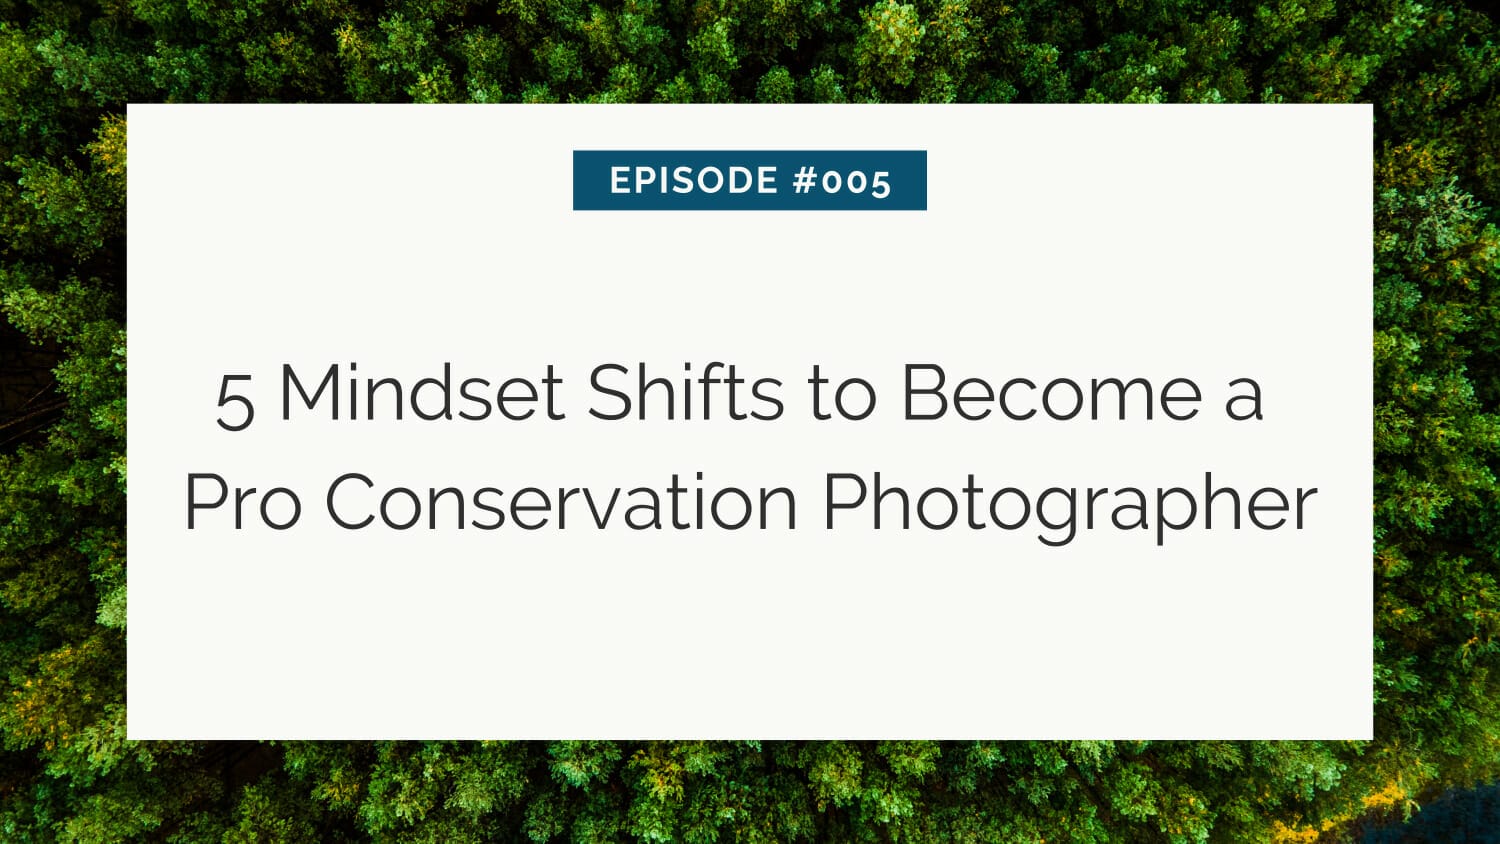 Episode #005: 5 mindset shifts to become a pro conservation photographer, displayed over a background of lush green foliage.